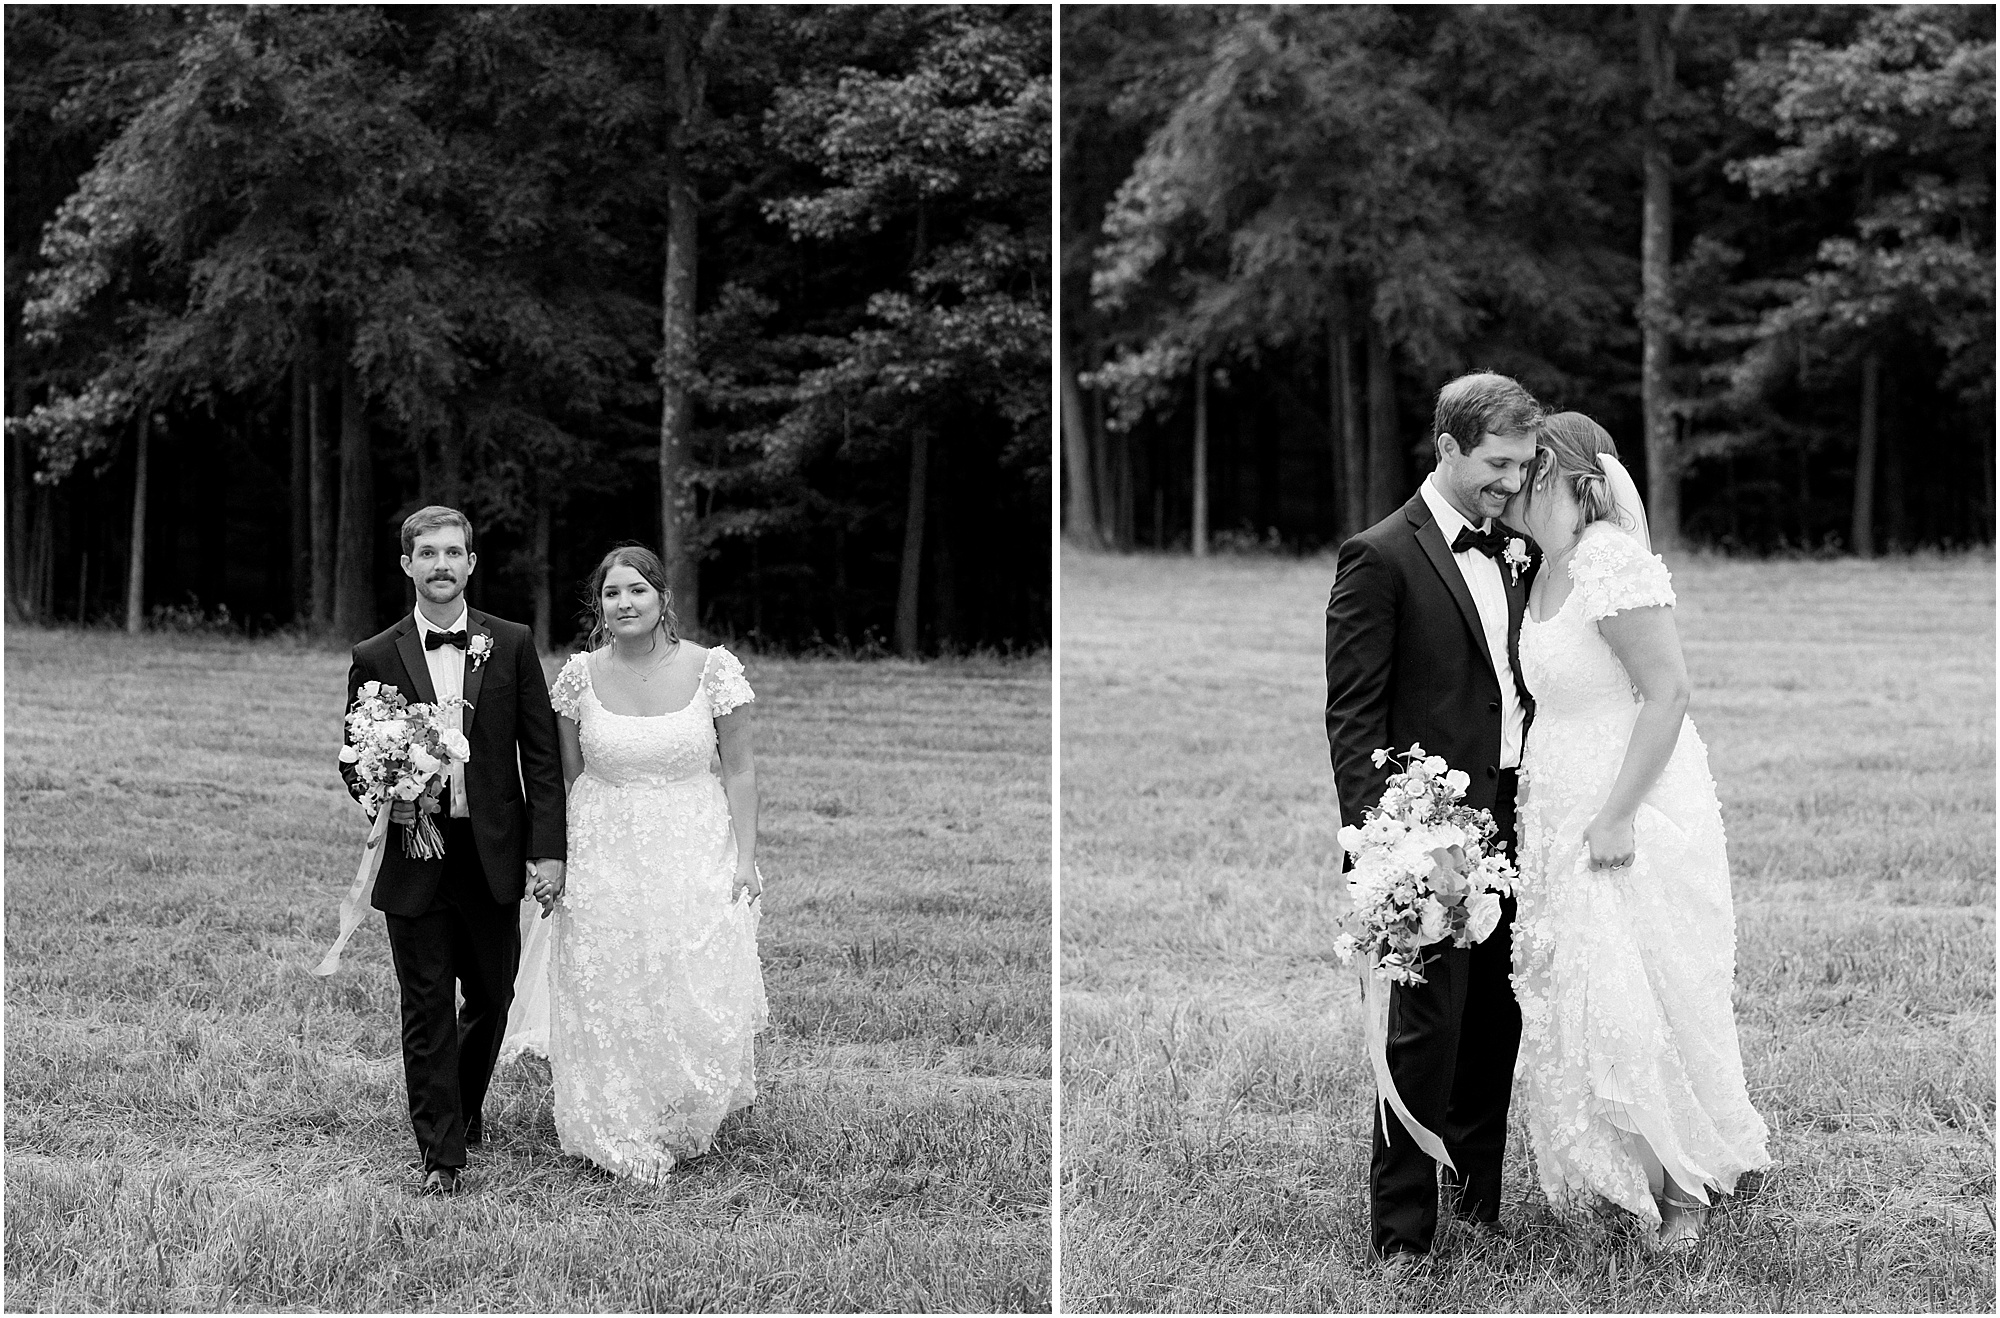 Bride and groom portraits in black and white walking together.